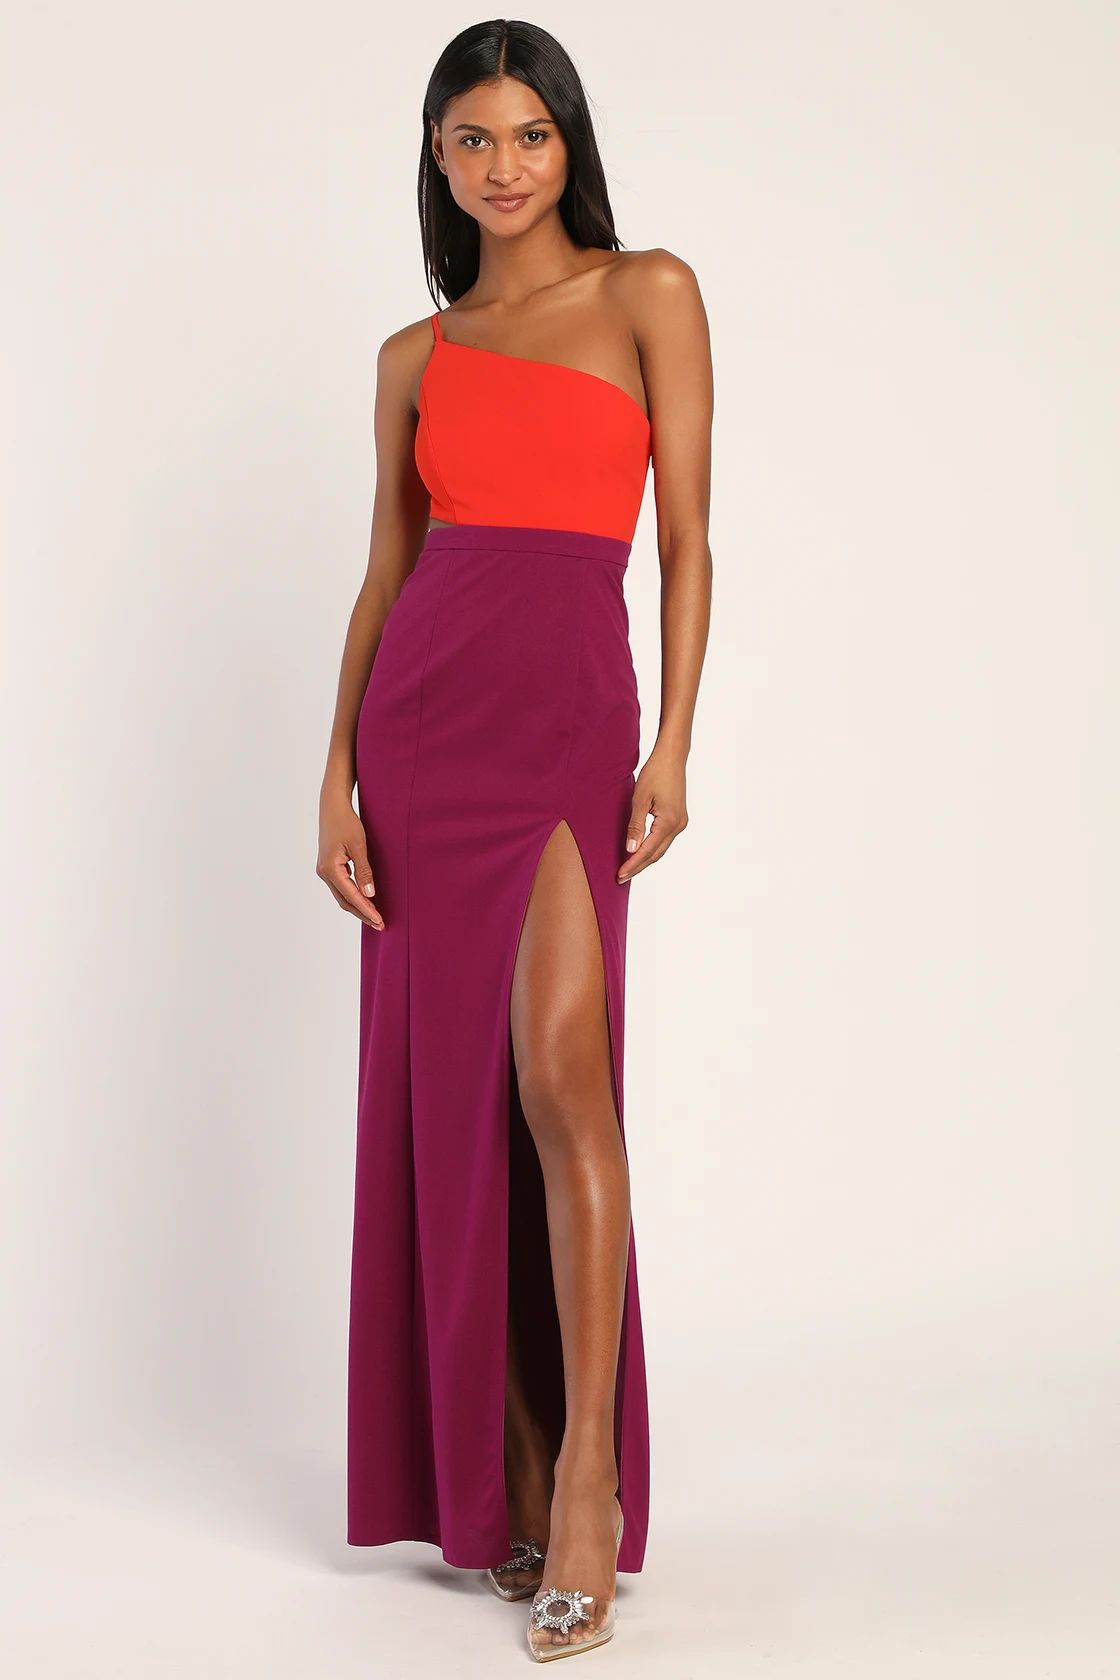 Pure Chic Red and Purple Asymmetrical One-Shoulder Maxi Dress | Lulus (US)